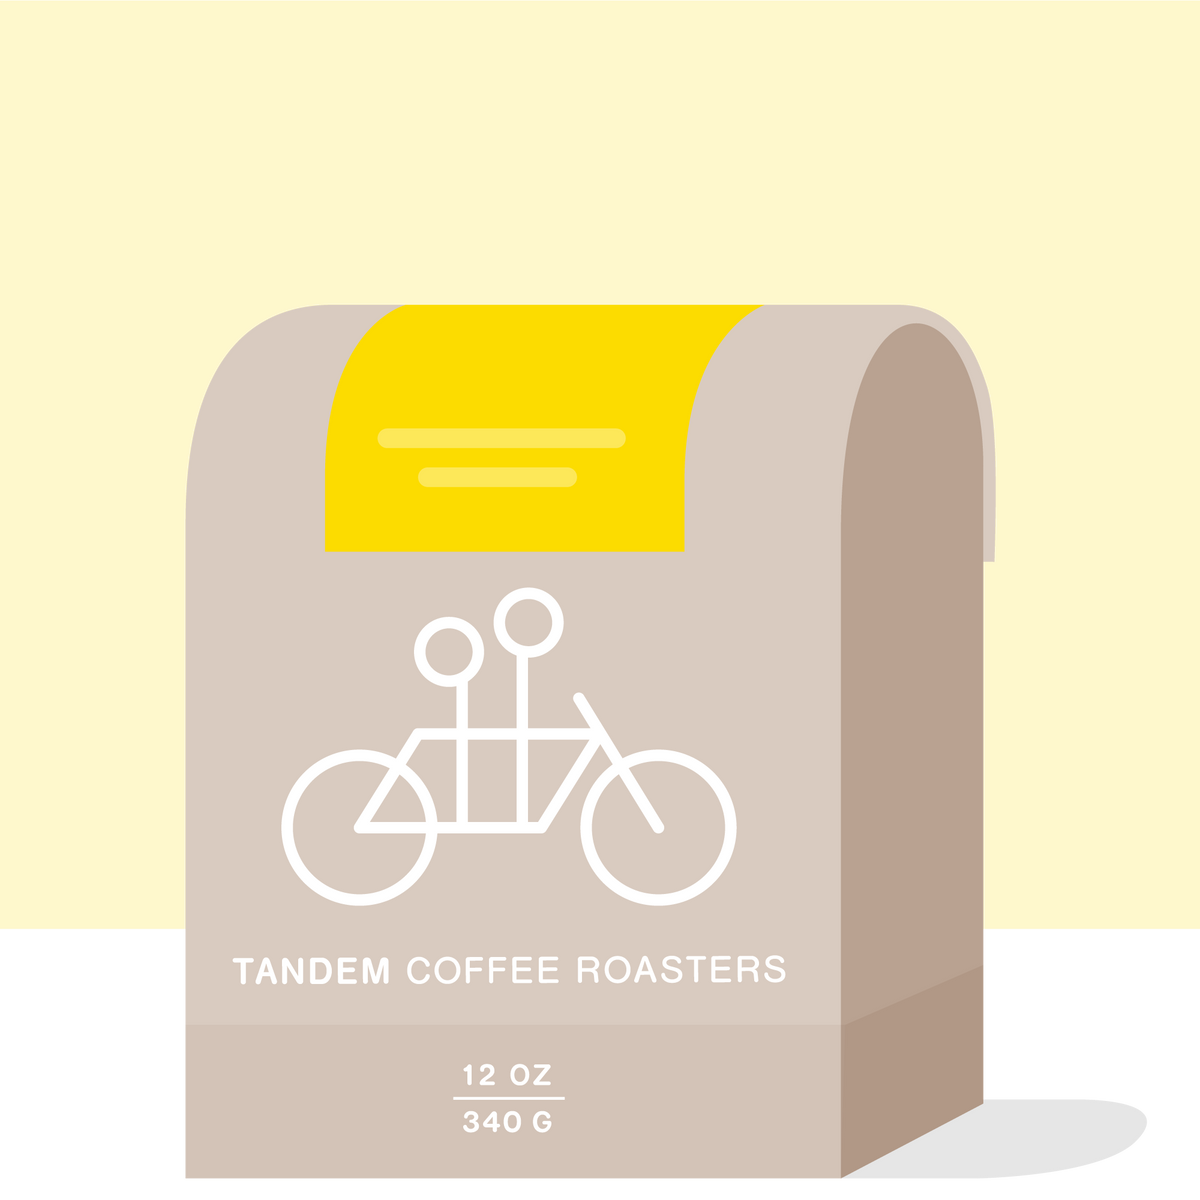 A stylized illustration of a gray Sun Lamp Decaf coffee bag with a tandem bicycle logo, labeled "Tandem Coffee Roasters" and a weight indication of 12 oz or 340 g.